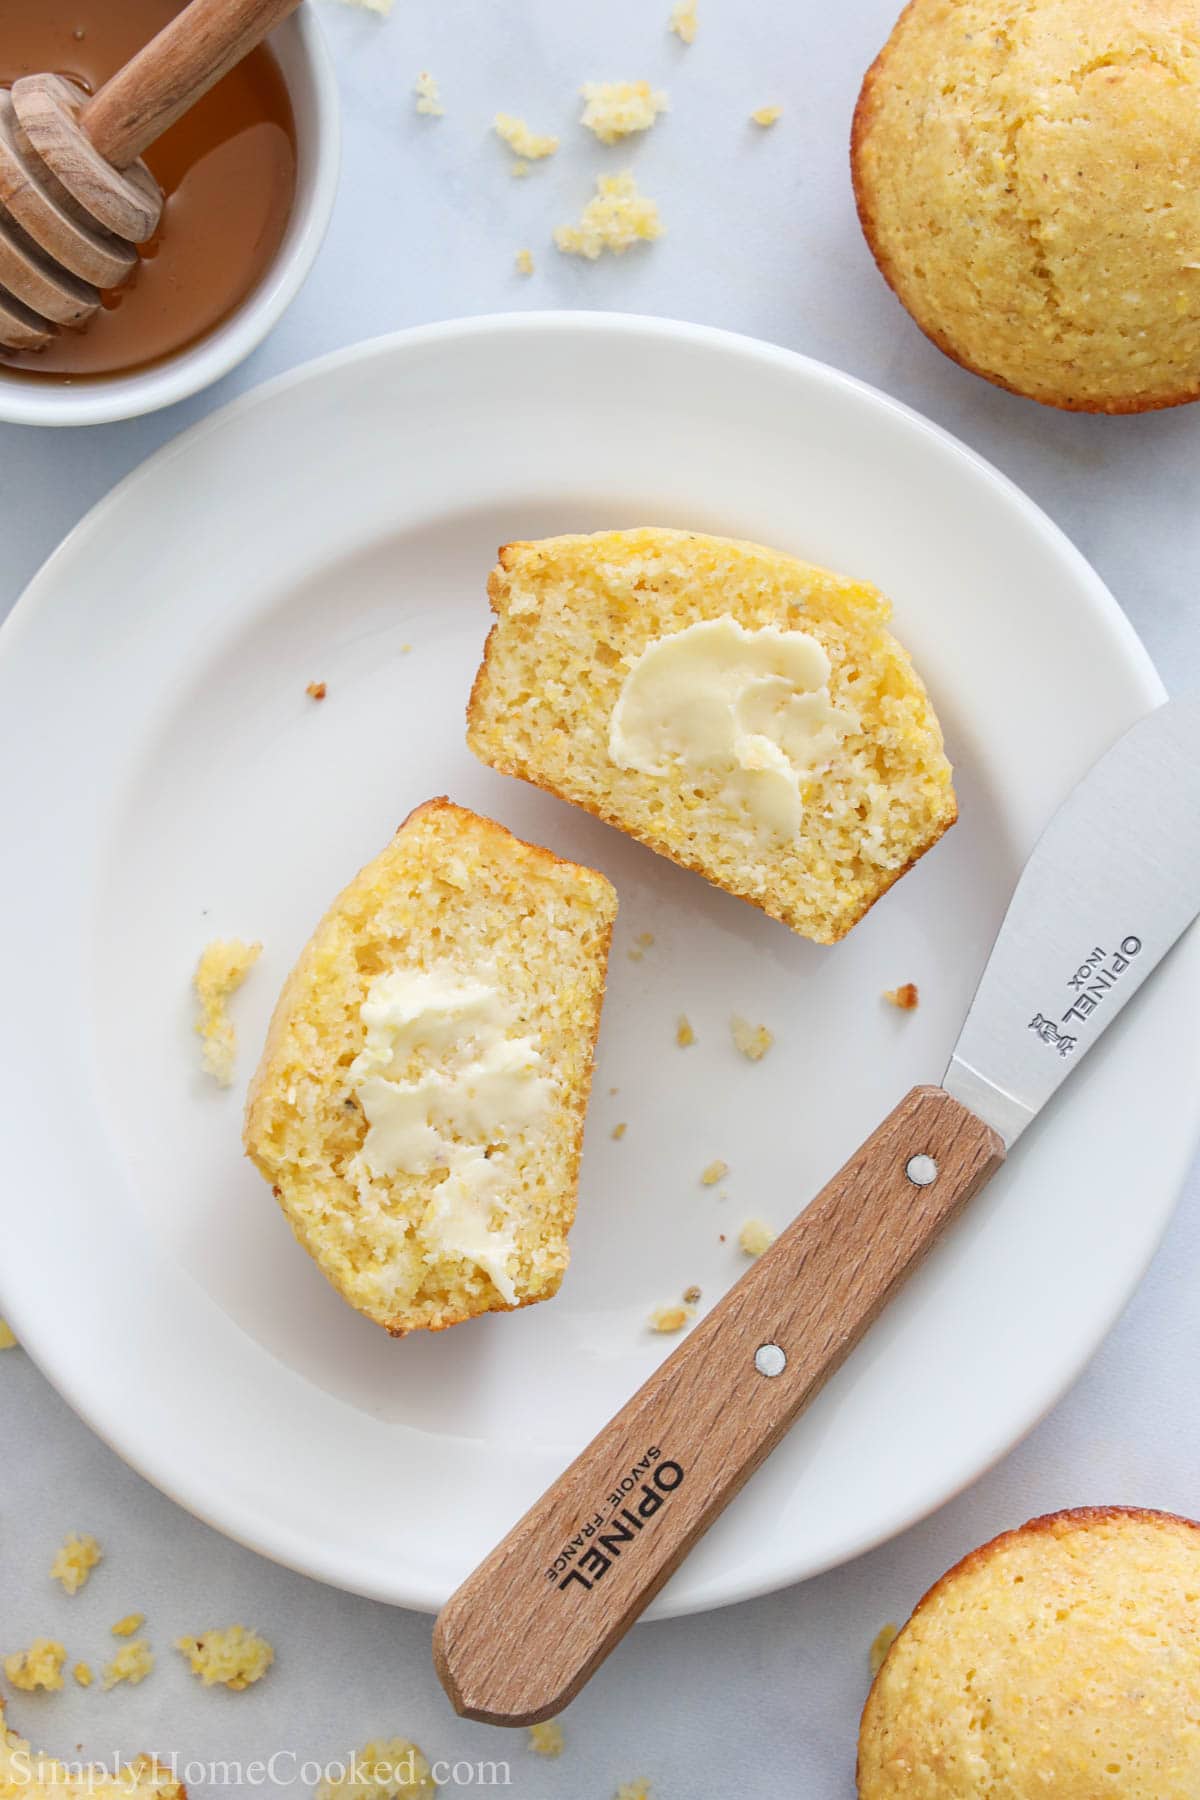 Vertical image of a Cornbread Muffin cut open and buttered on a white plate with a knife and with honey nearby